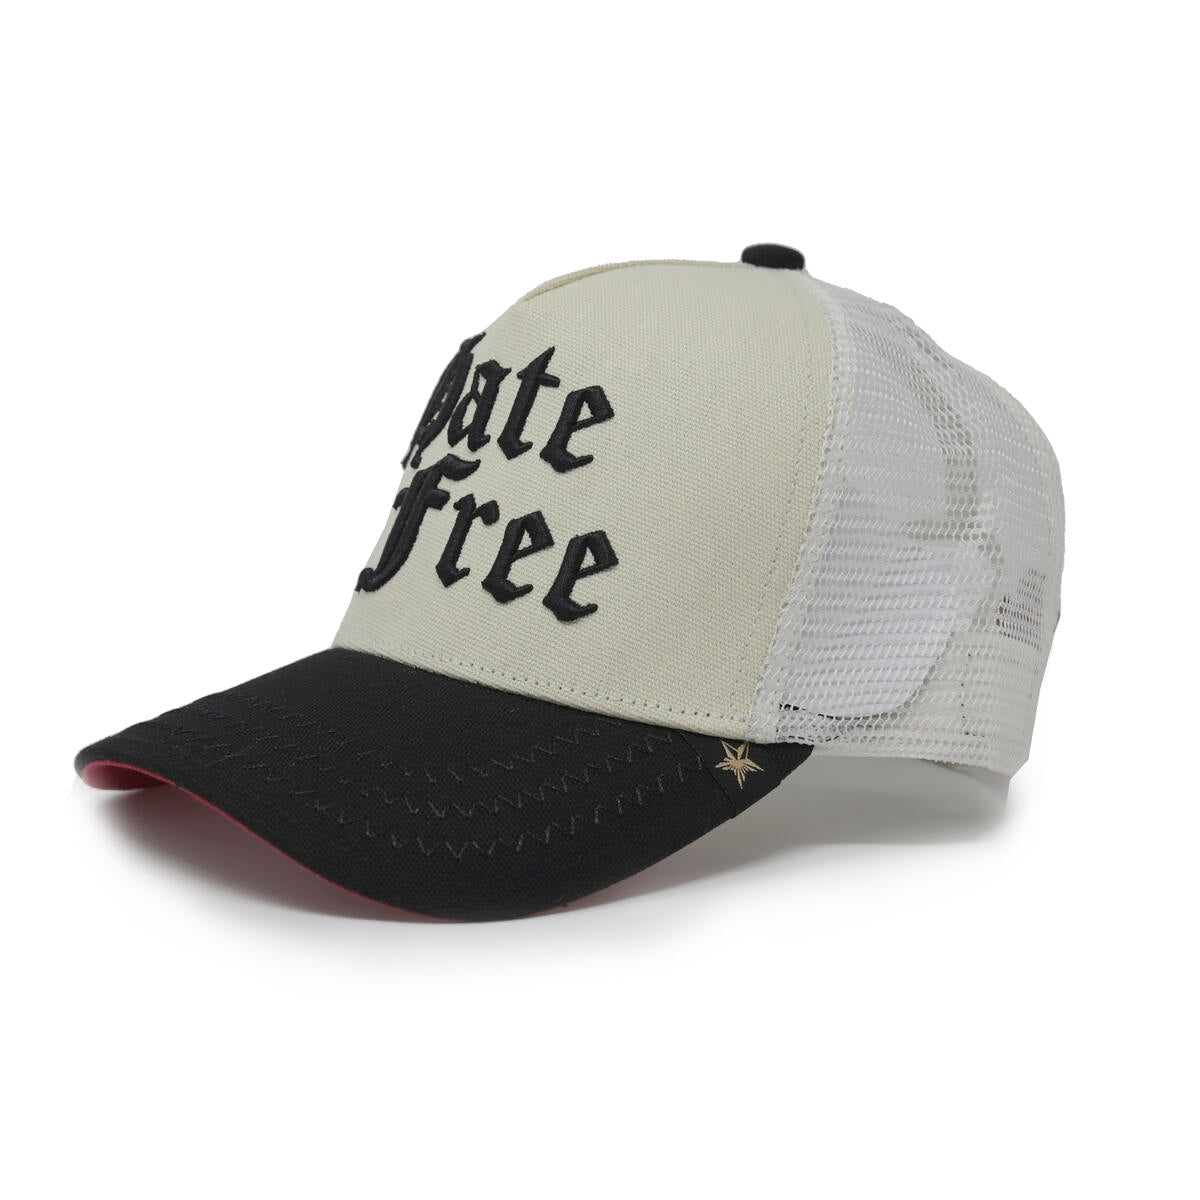 GOLD STAR - Hate Free - Off White/Black - Red